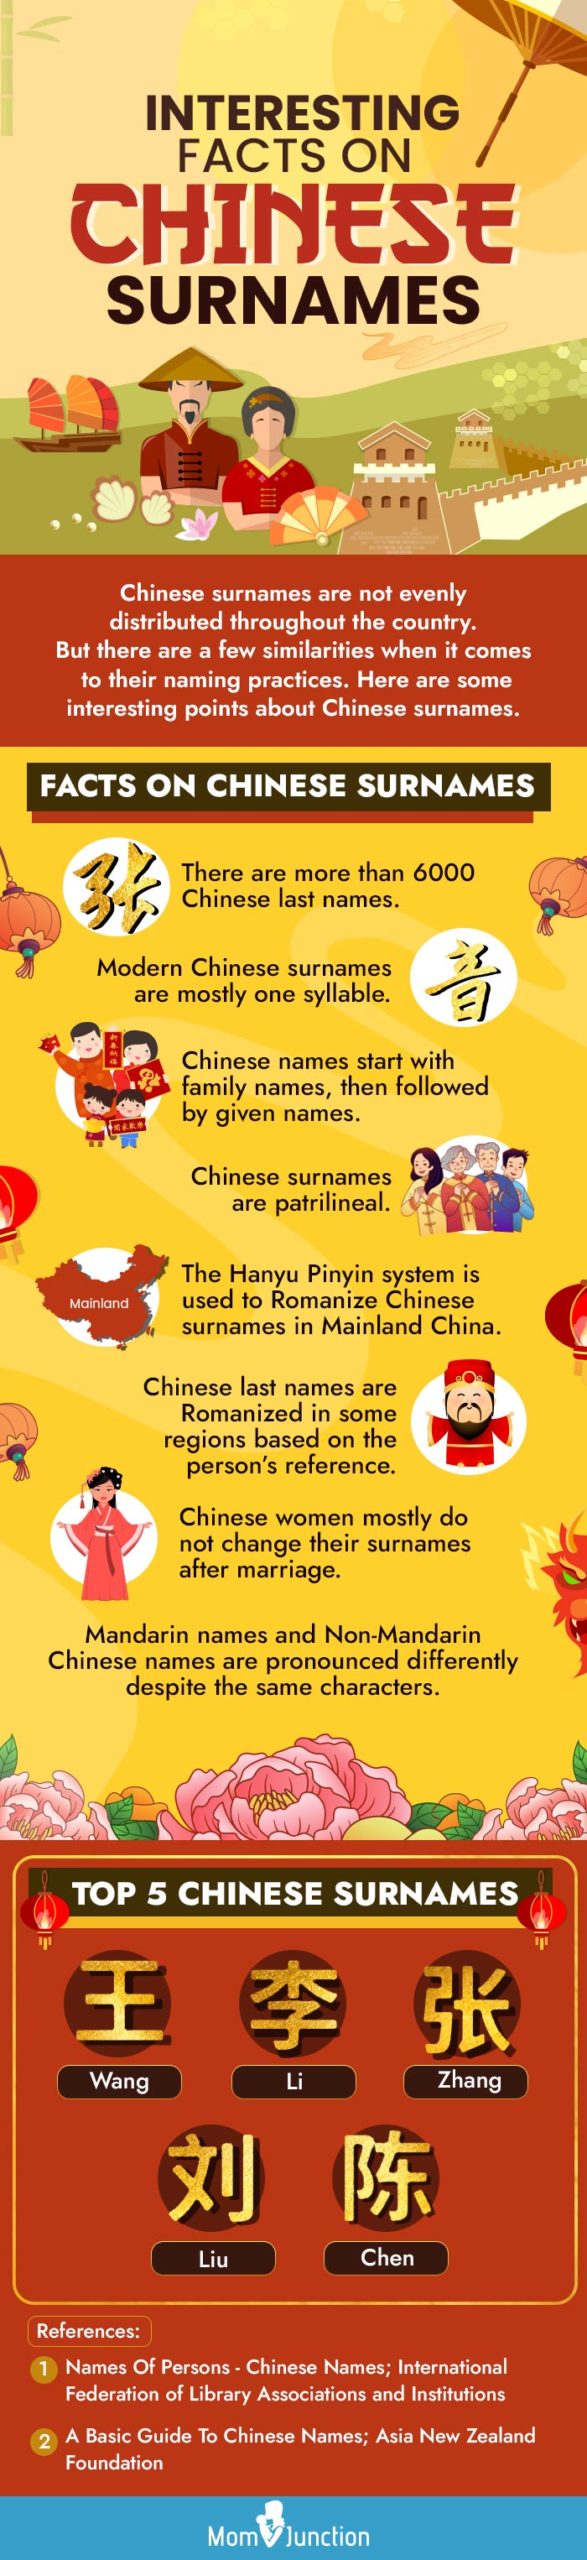 interesting facts on chinese surnames (infographic)